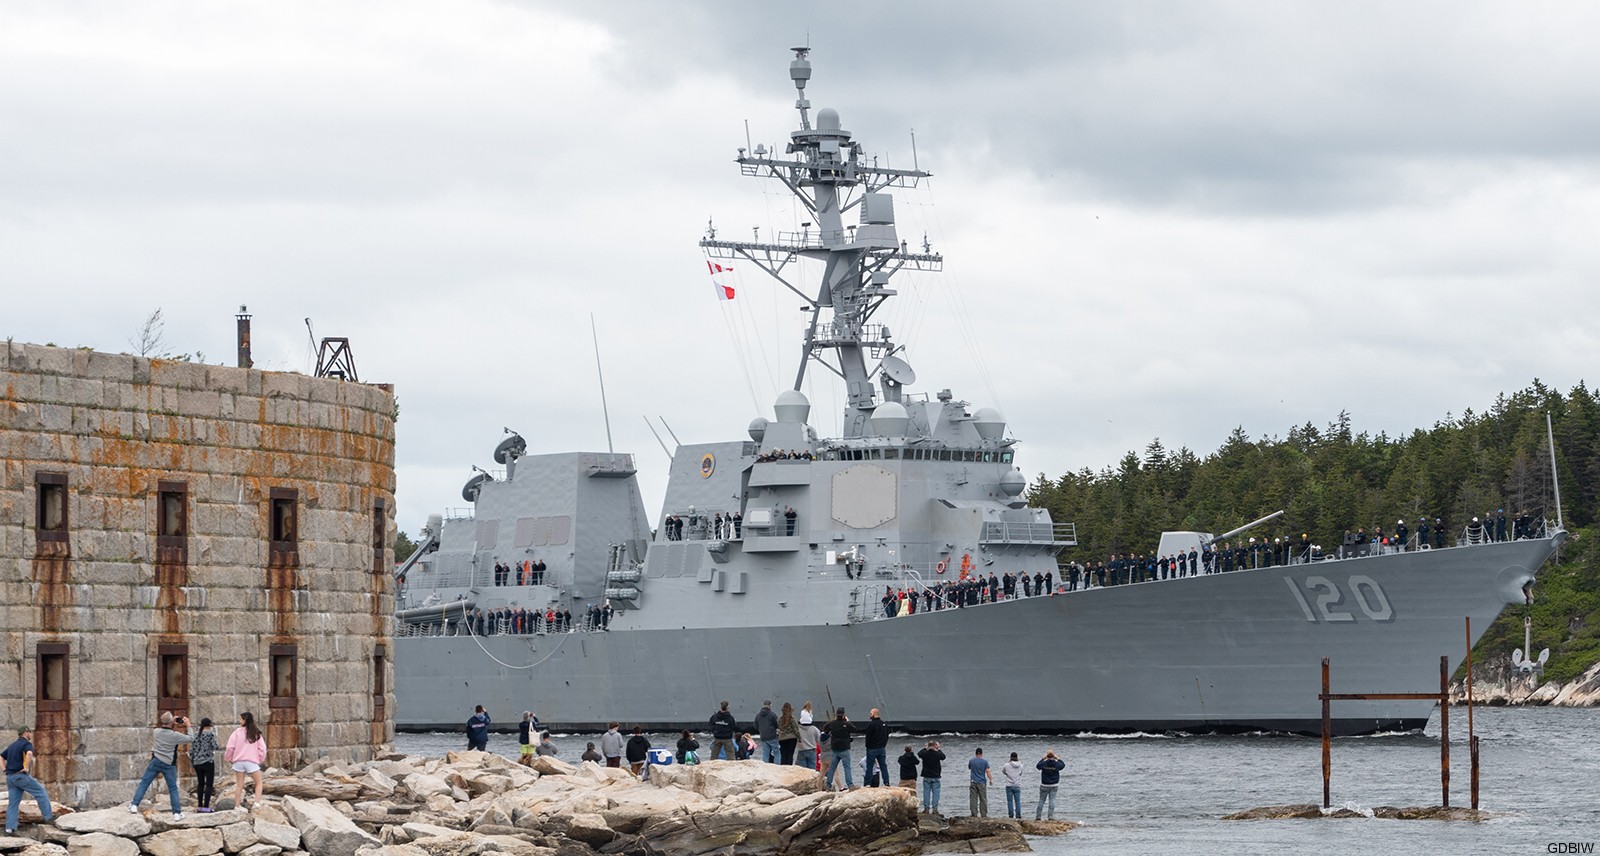 ddg-120 uss carl m. levin arleigh burke class guided missile destroyer 48